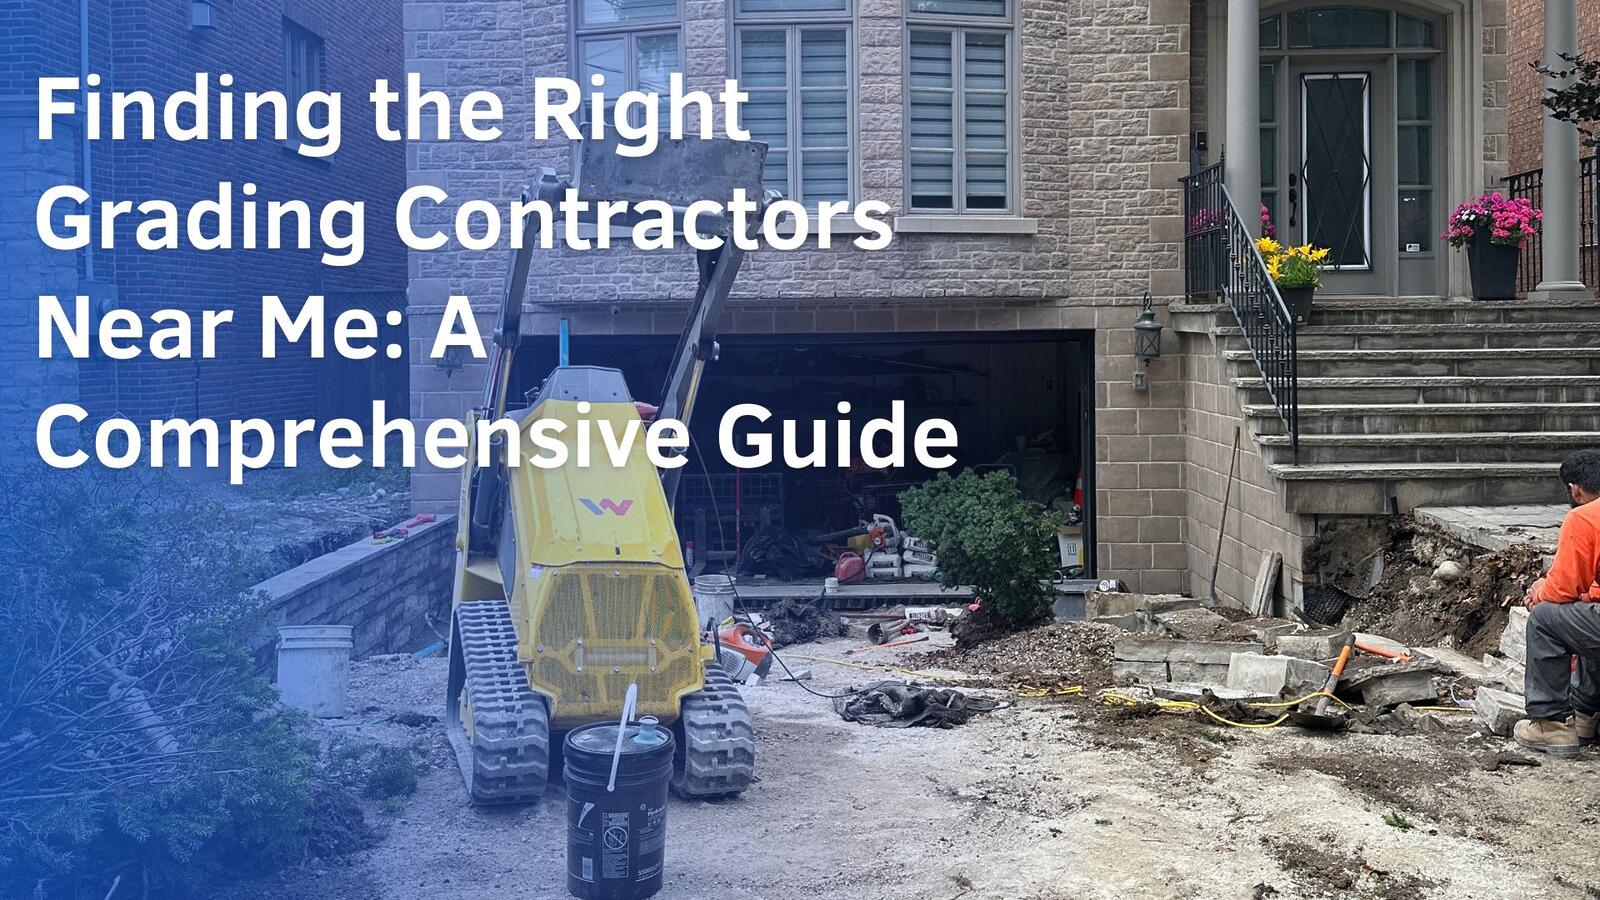 Finding the Right Grading Contractors Near Me: A Comprehensive Guide